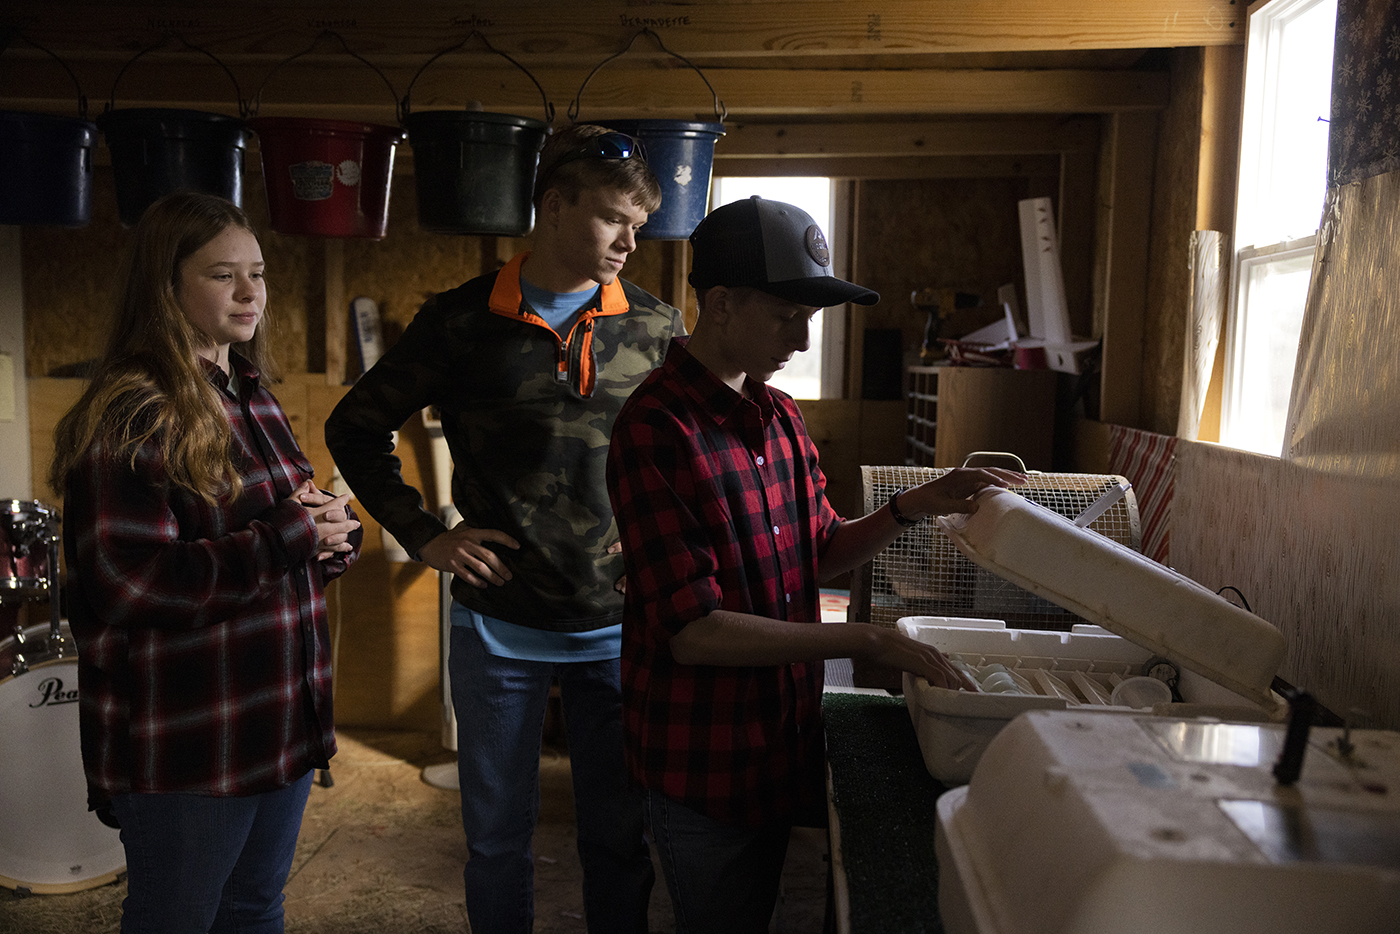 Veronica Clements, 14, Nicholas Clements, 16, and JohnPaul Clements, 13, take a look at eggs in incubators at their family’s business Clements Family Farm in Santa Fe